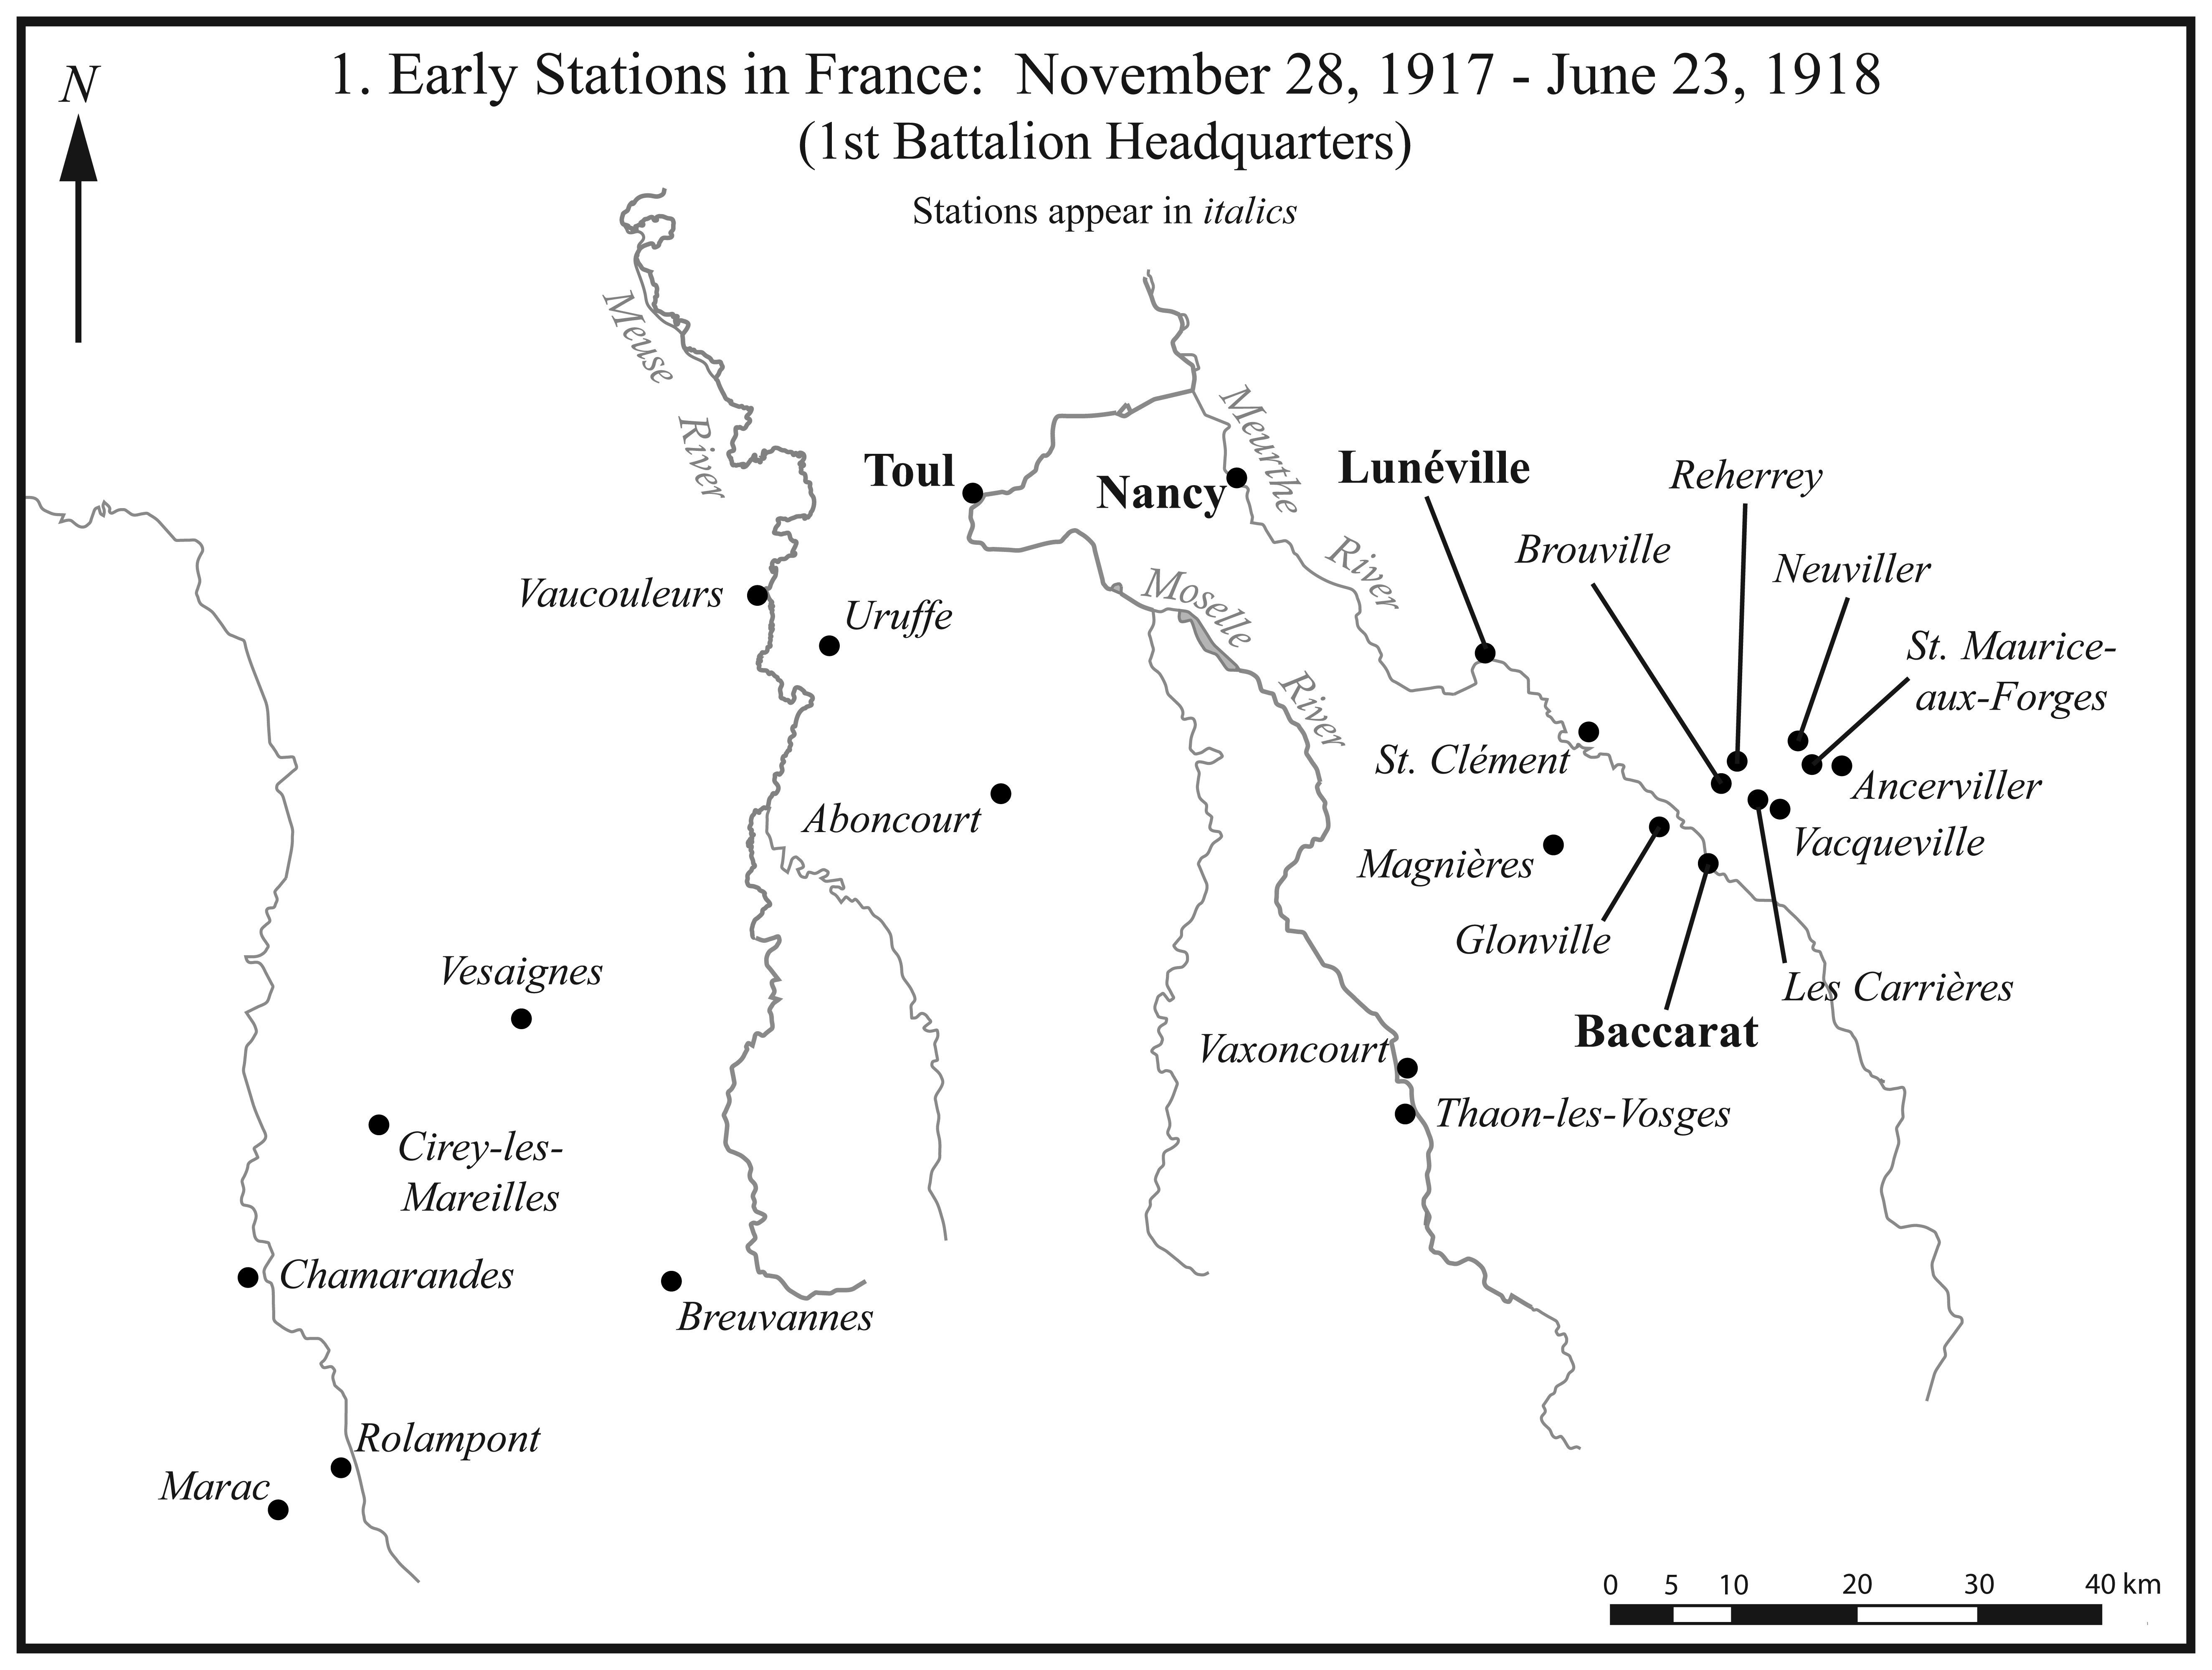 I.1. Early Stations in France.